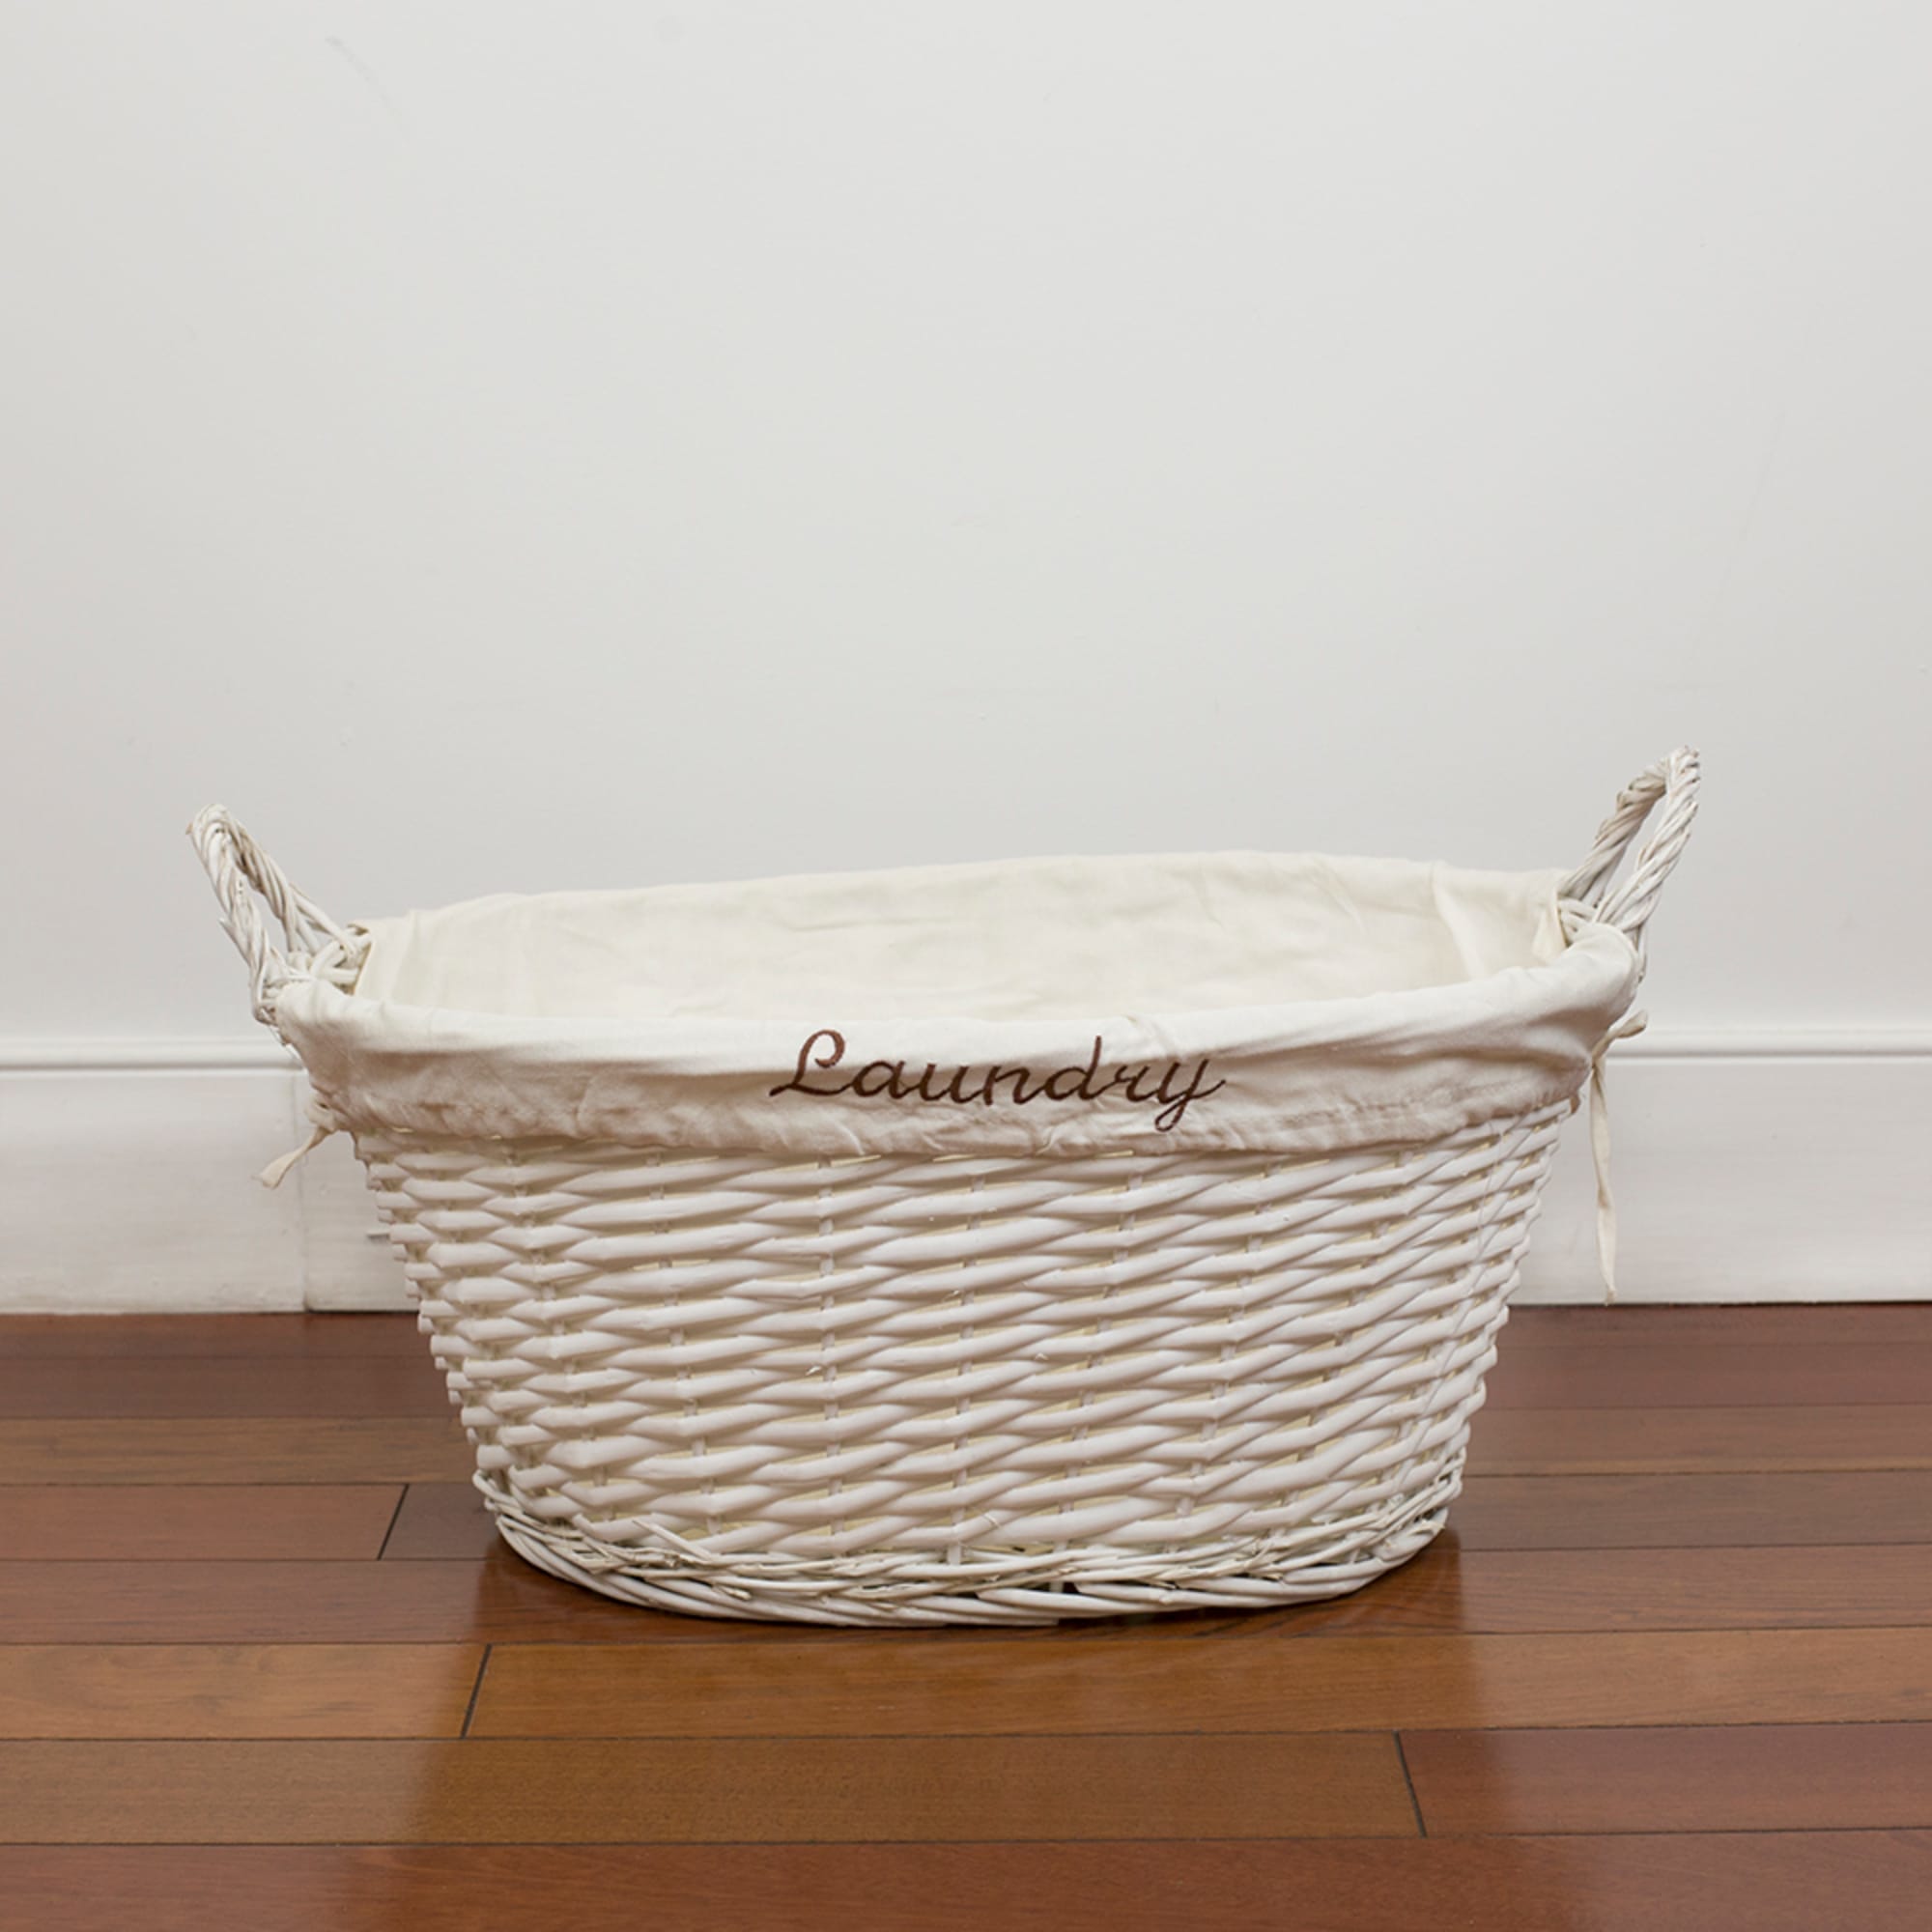 Home Basics Laundry Wicker Basket with Removable Liner, White $10.00 EACH, CASE PACK OF 6